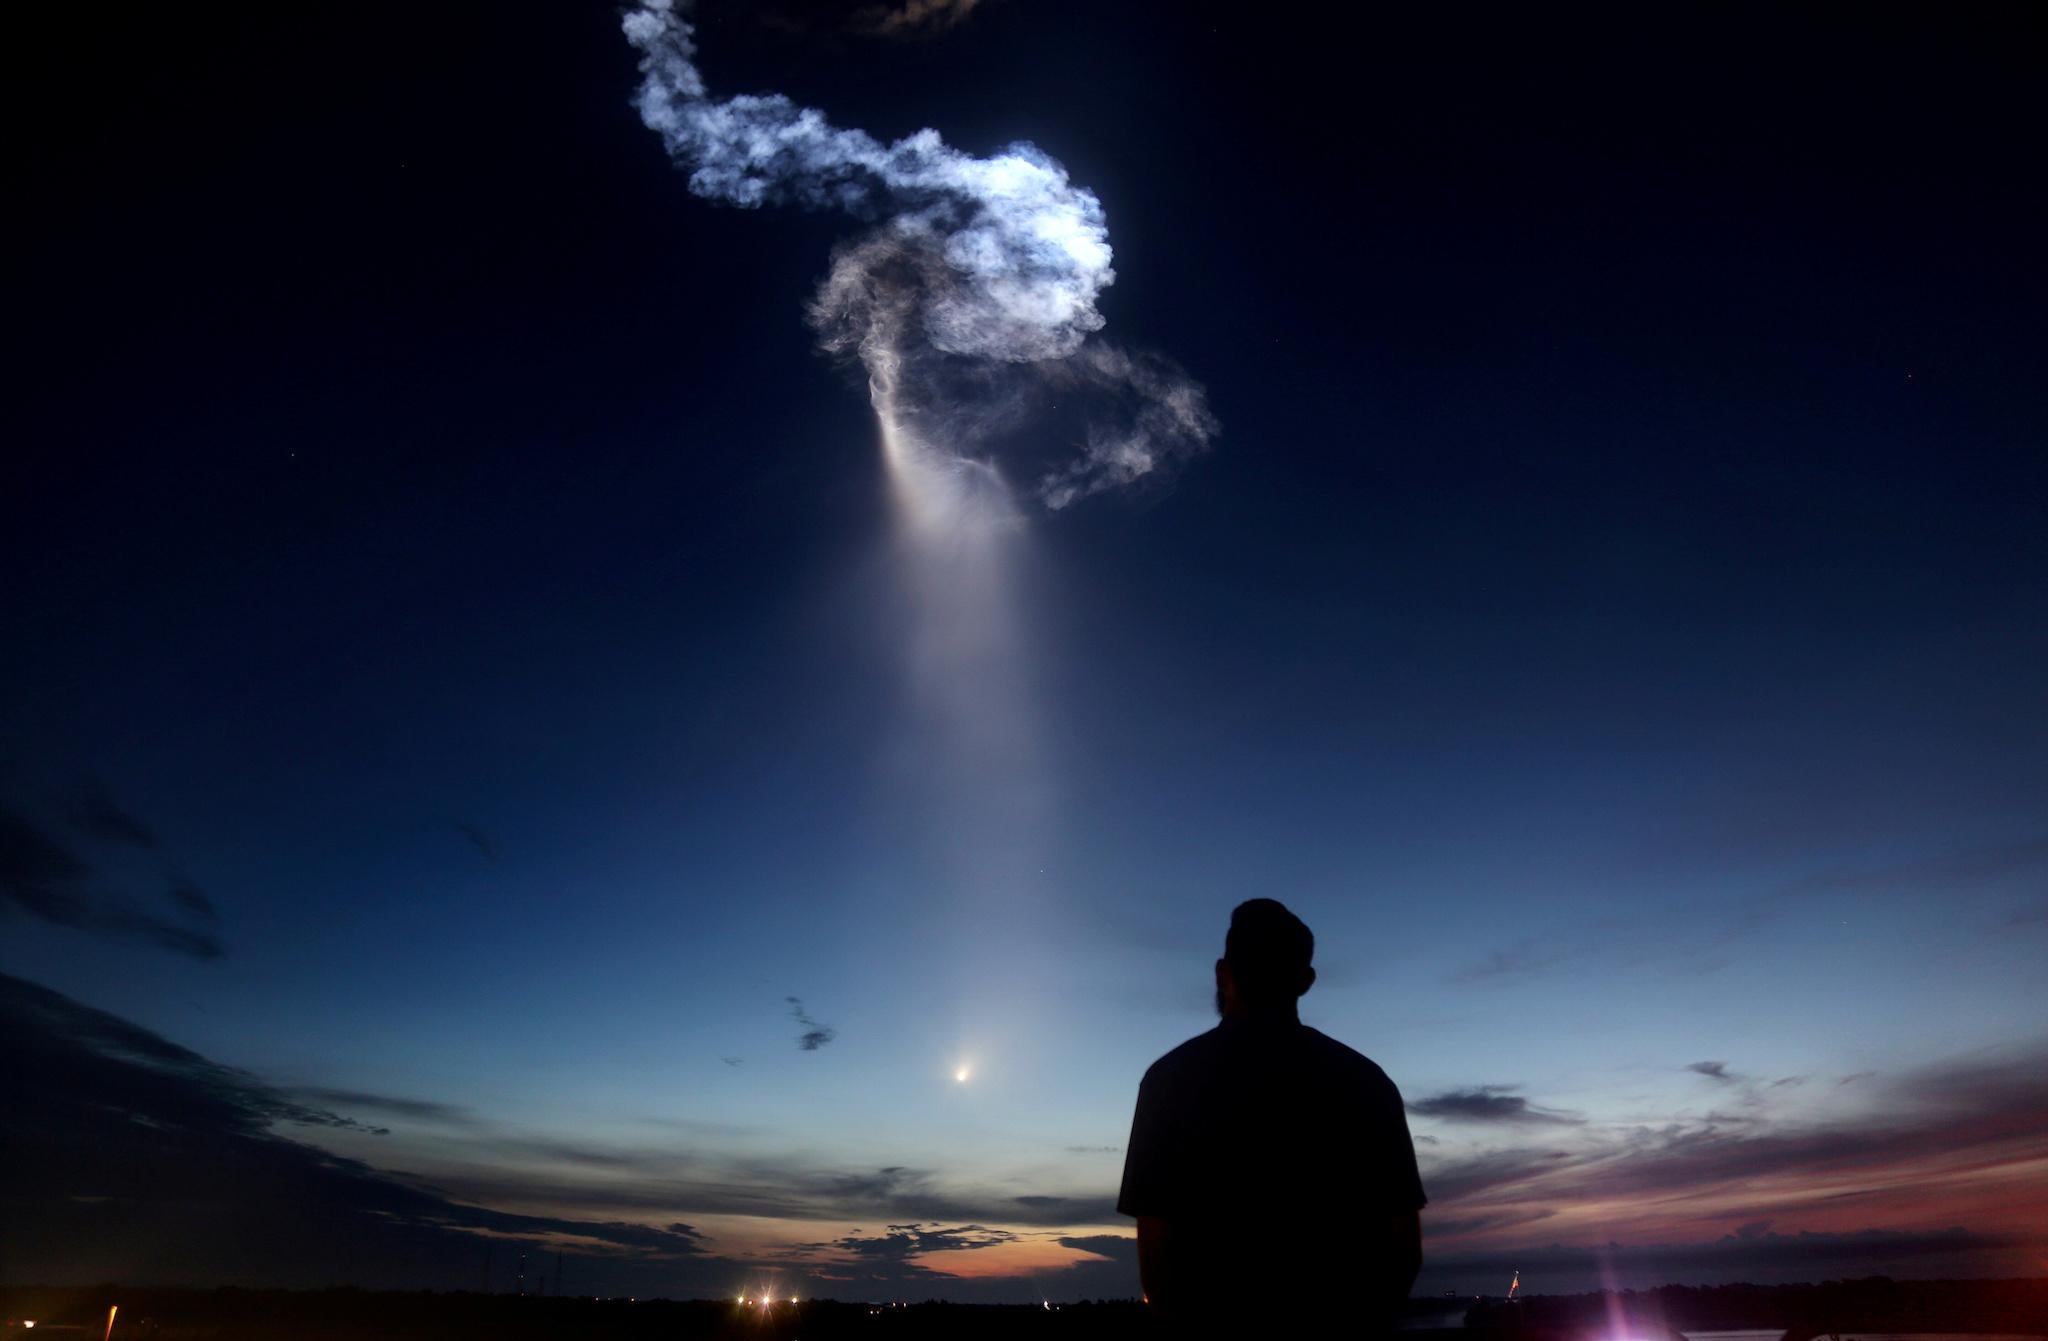 A SpaceX Falcon 9 rocket exits the atmosphere for a cargo resupply mission to the International Space Station, over Cape Canaveral, Florida, U.S., June 29, 2018